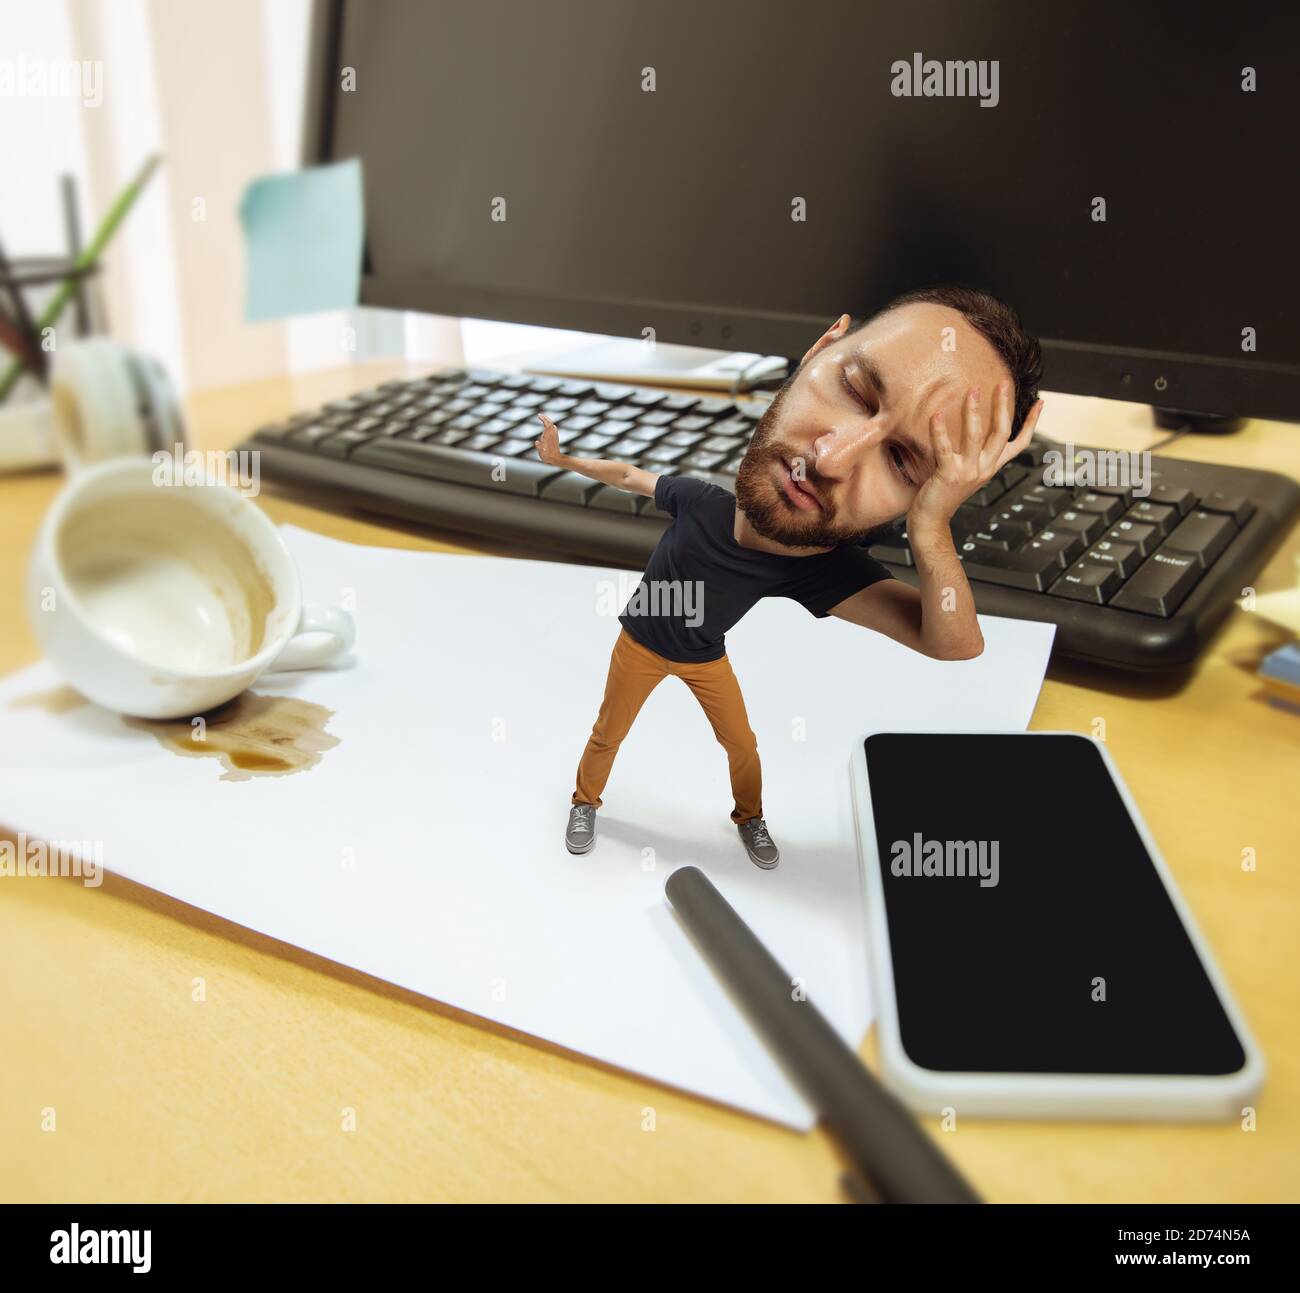 Need more sleep. Tired man, office worker holding his huge tired head, funny. Overworked caucasian man with little body and huge head looks stressed, shocked at big workplace. Concept of work, job, deadline. Stock Photo